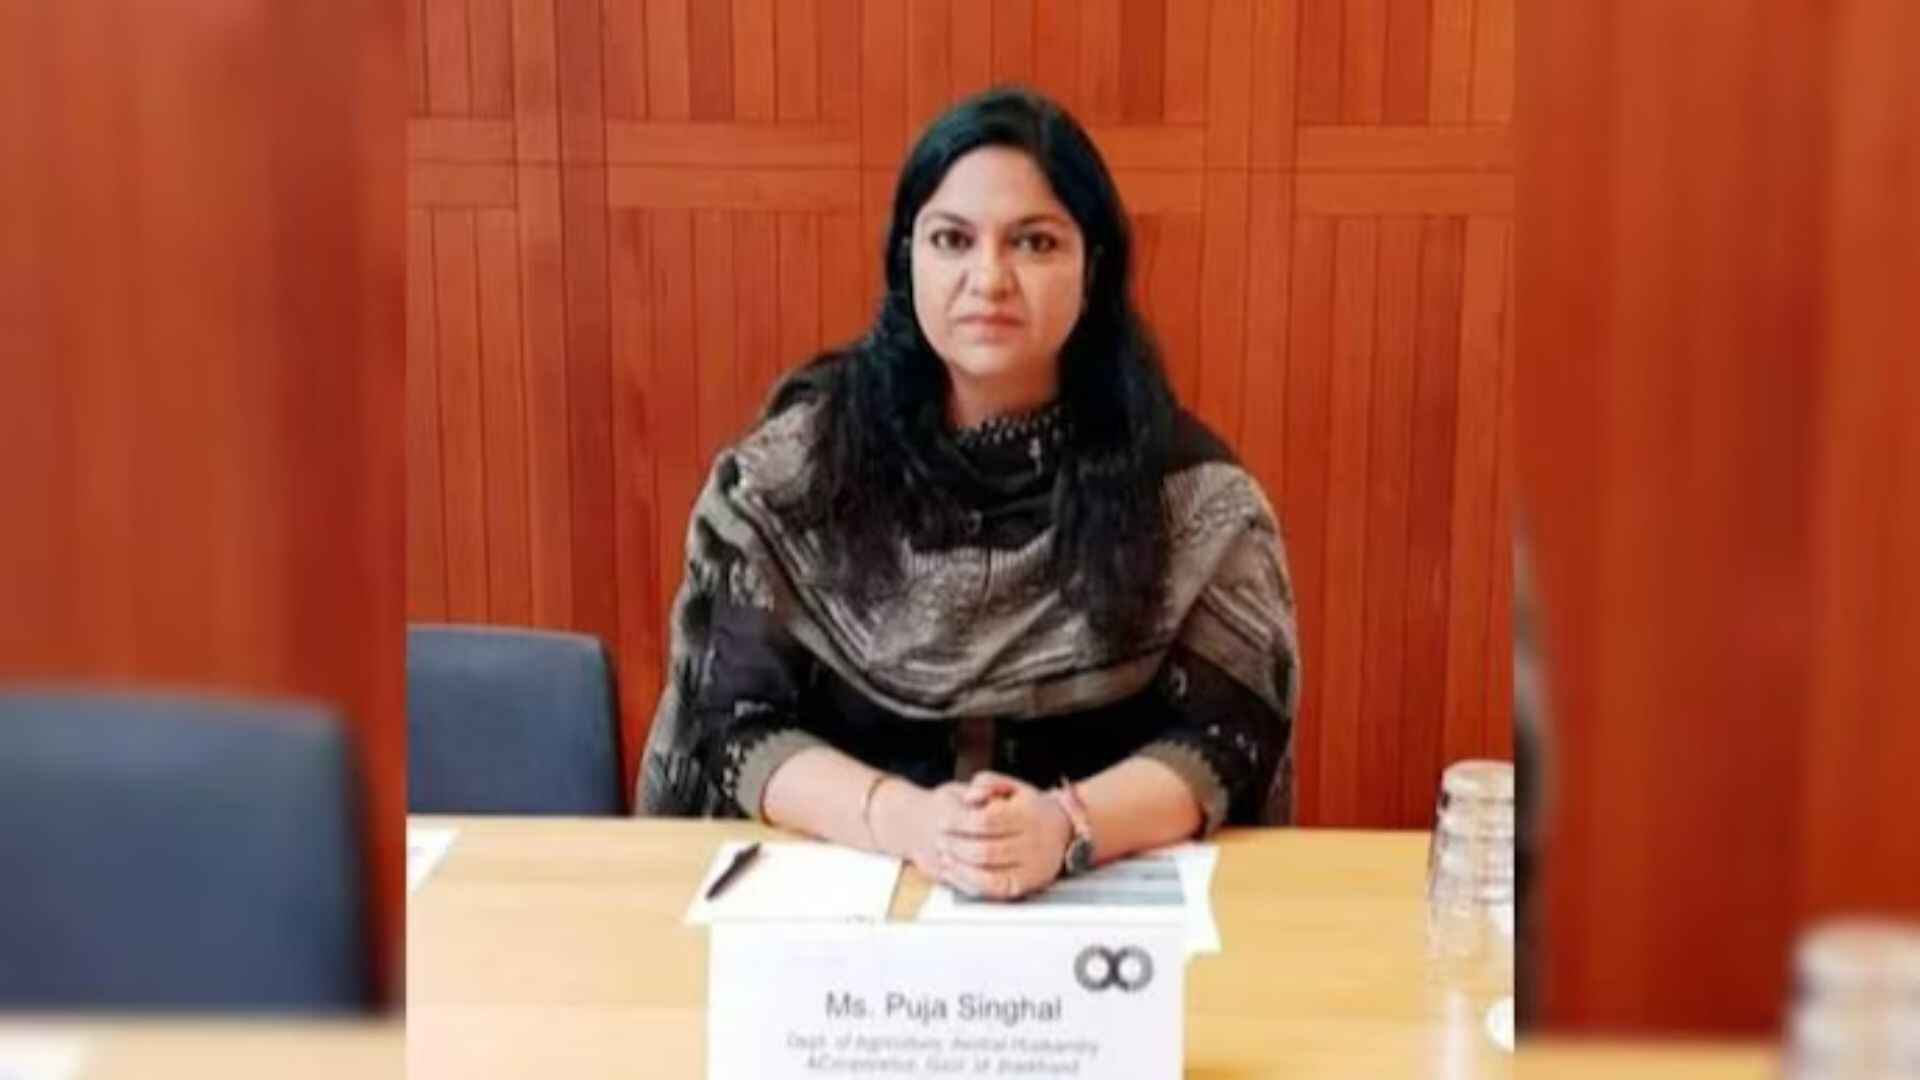 SC Denies Bail To Suspended IAS Officer Pooja Singhal In Money Laundering Case